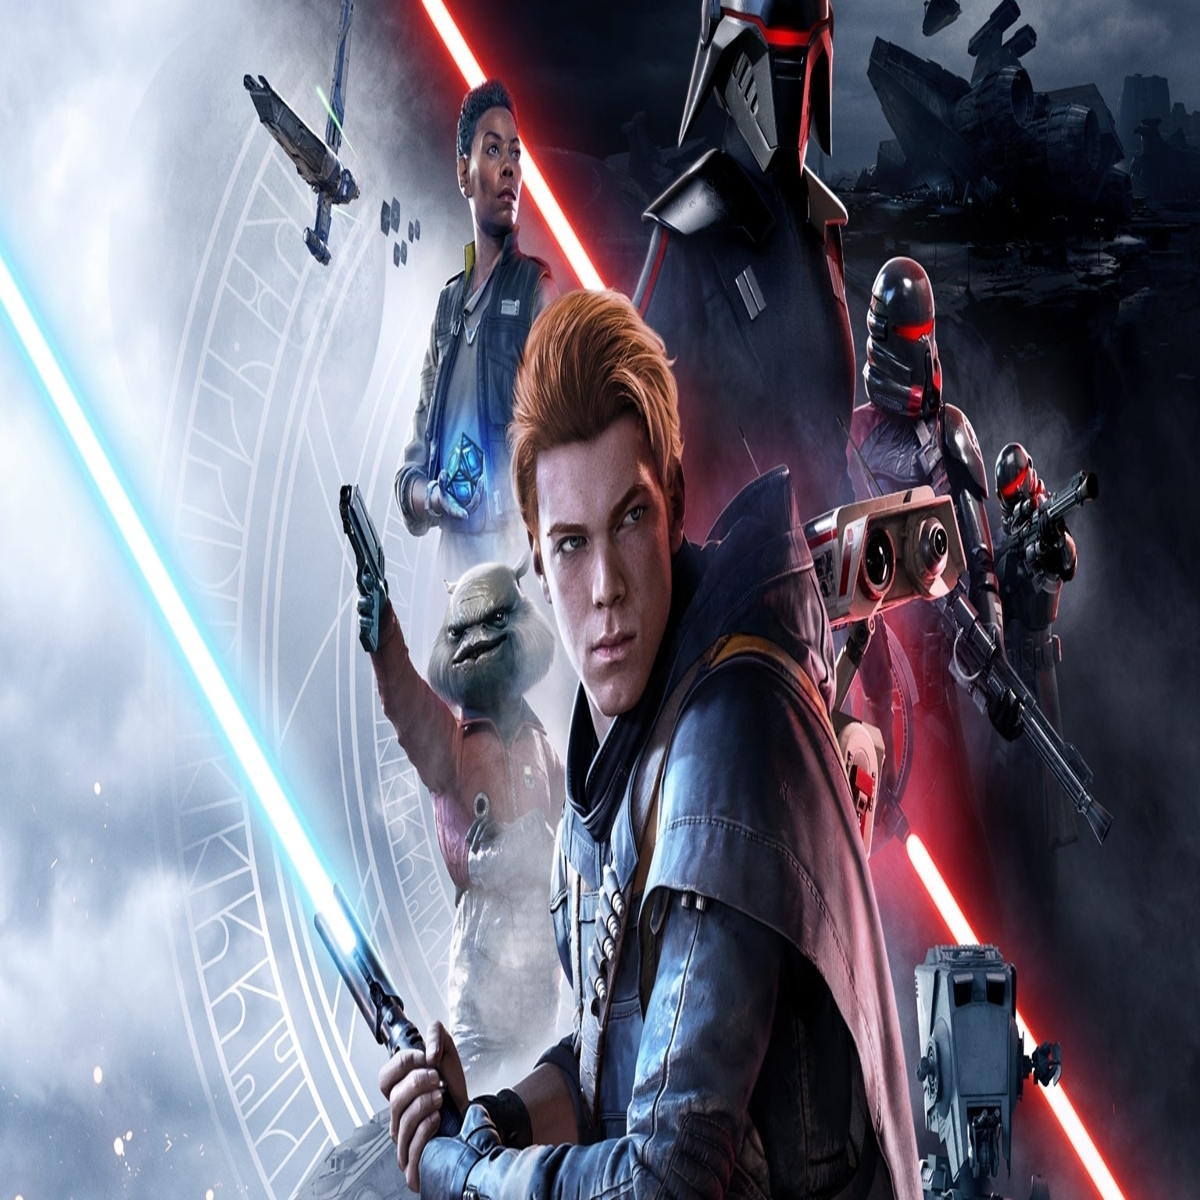 Star Wars Jedi: Fallen Order' Has Technical Problems That Are